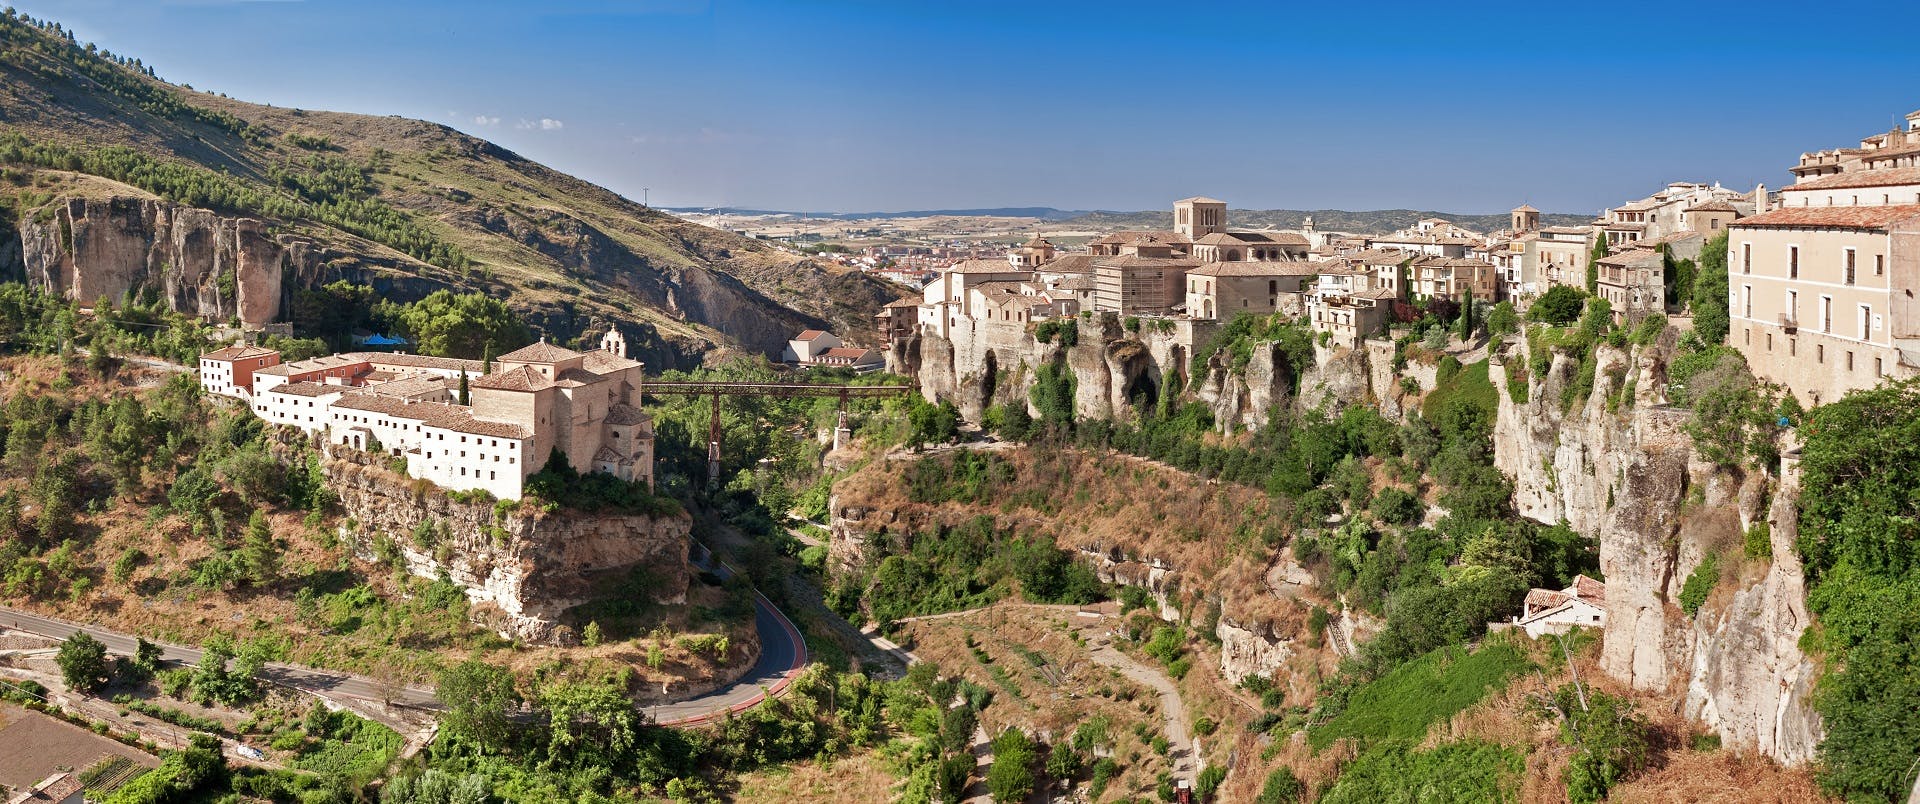 Cuenca's nature and city tour from Madrid